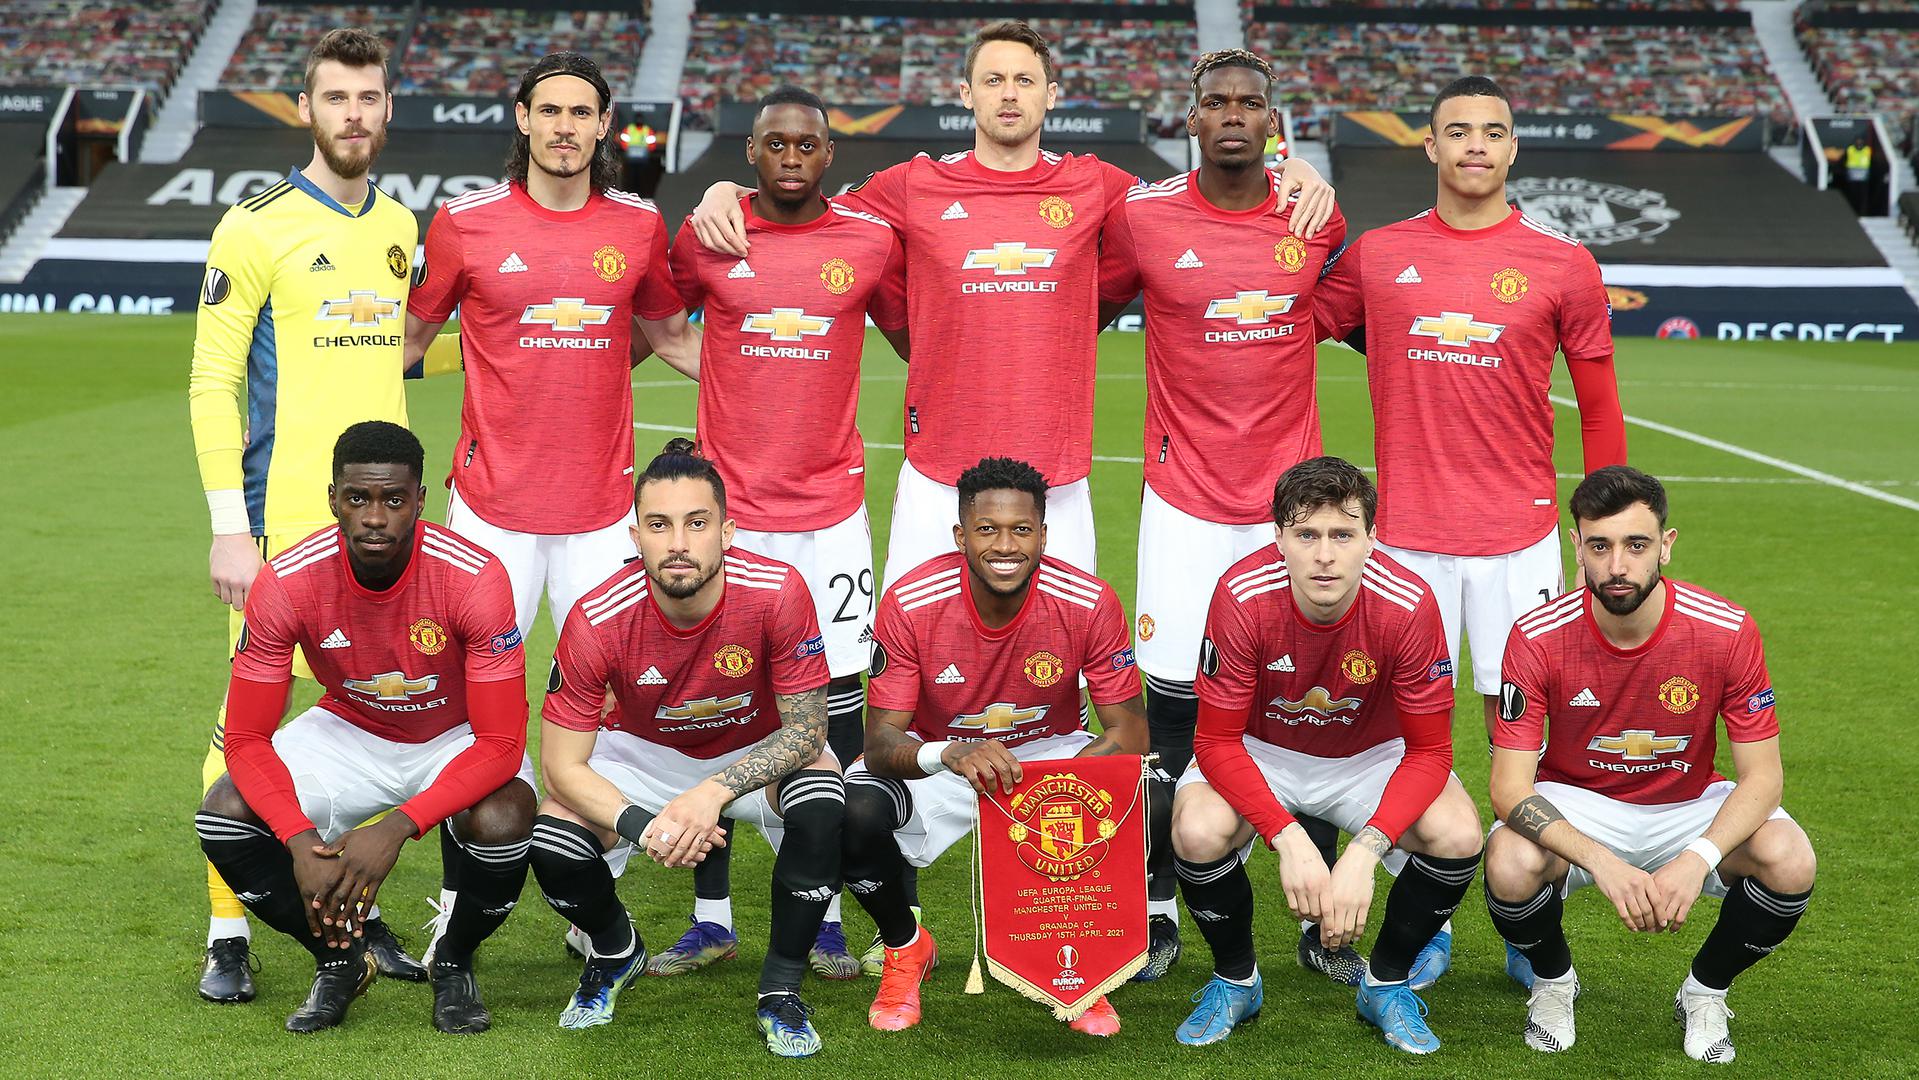 Man Of The Match And Player Ratings Man Utd 2 Granada 0 On 15 April Manchester United